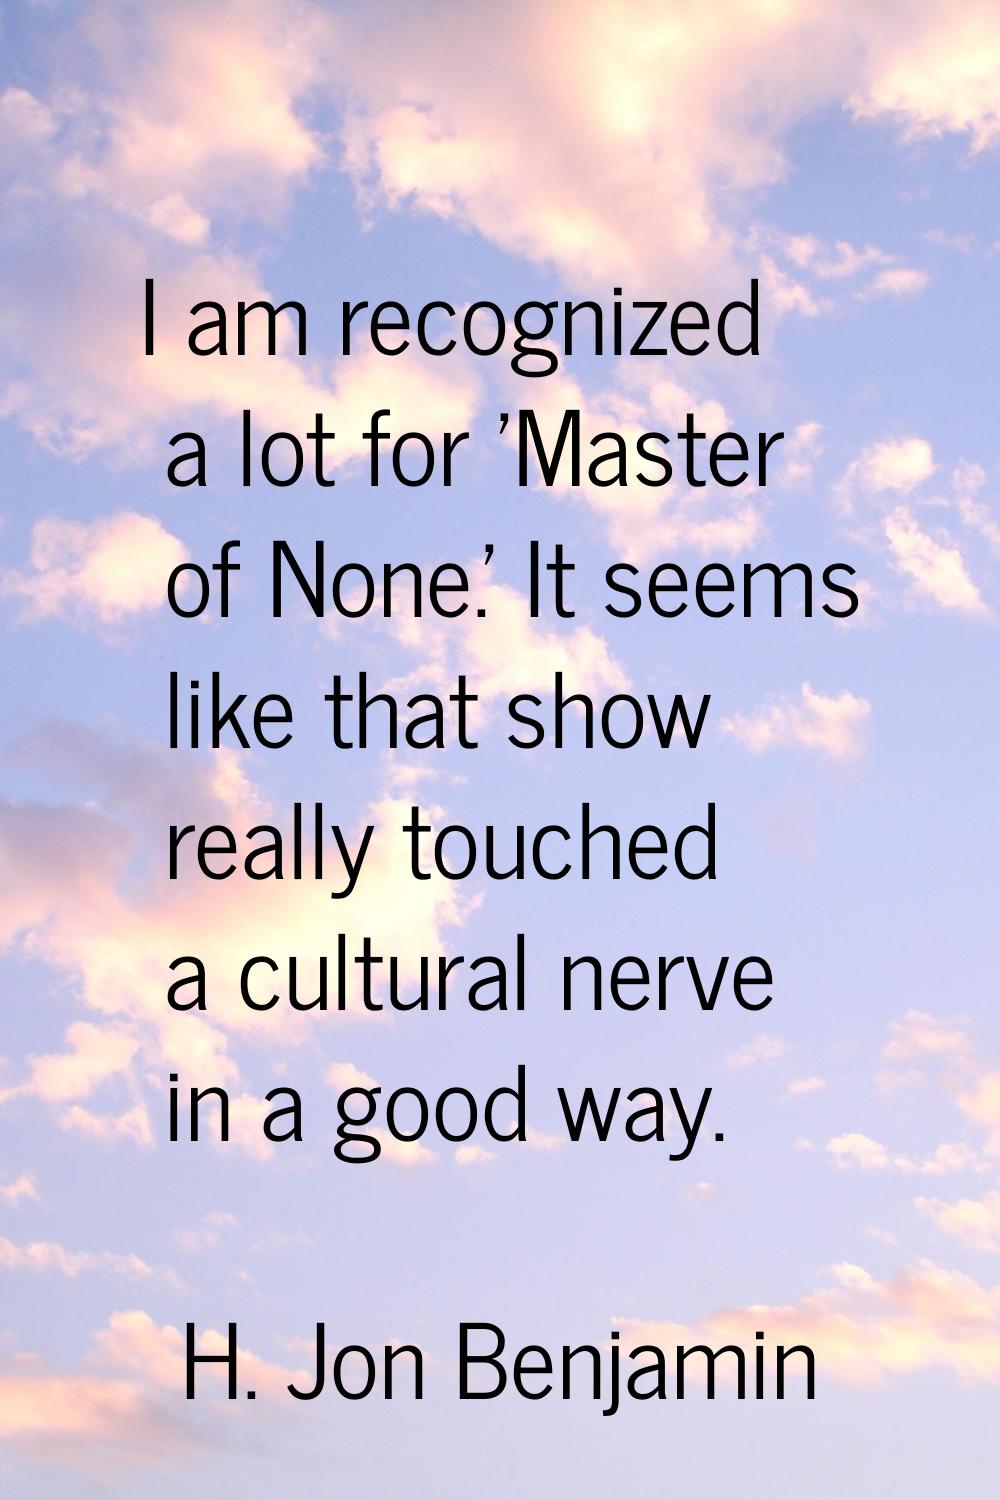 I am recognized a lot for 'Master of None.' It seems like that show really touched a cultural nerve